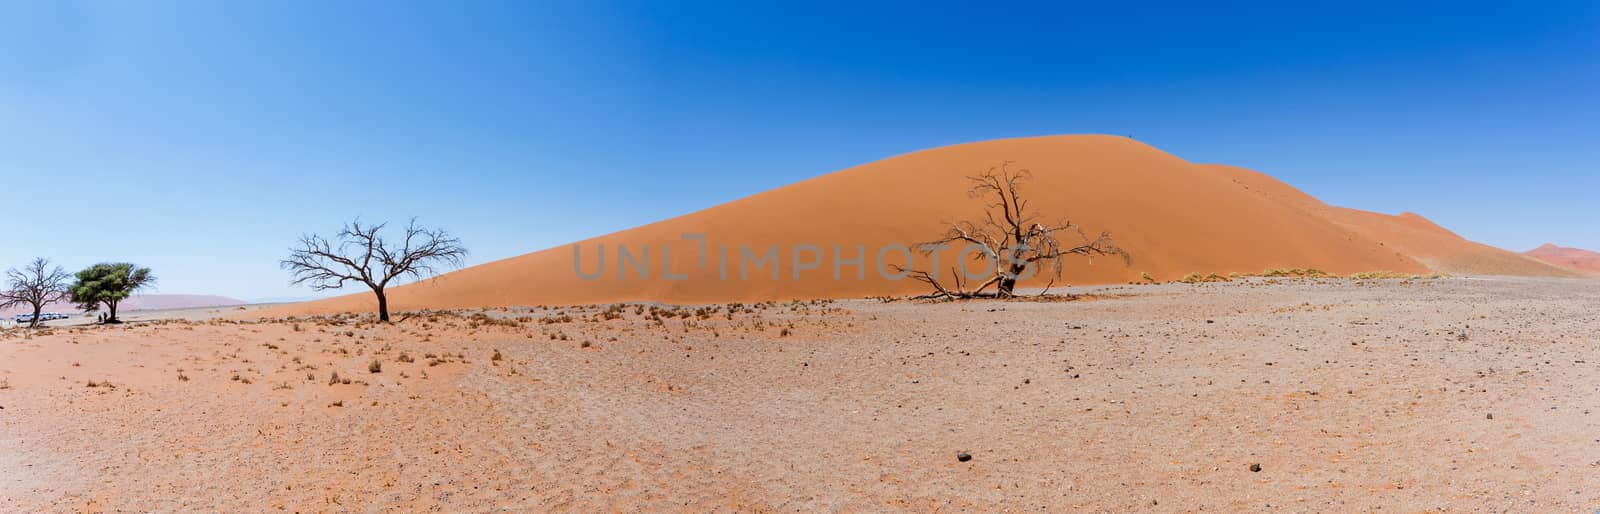 wide panorama of Dune 45 in sossusvlei Namibia, view from the top of a dune, best place in namibia